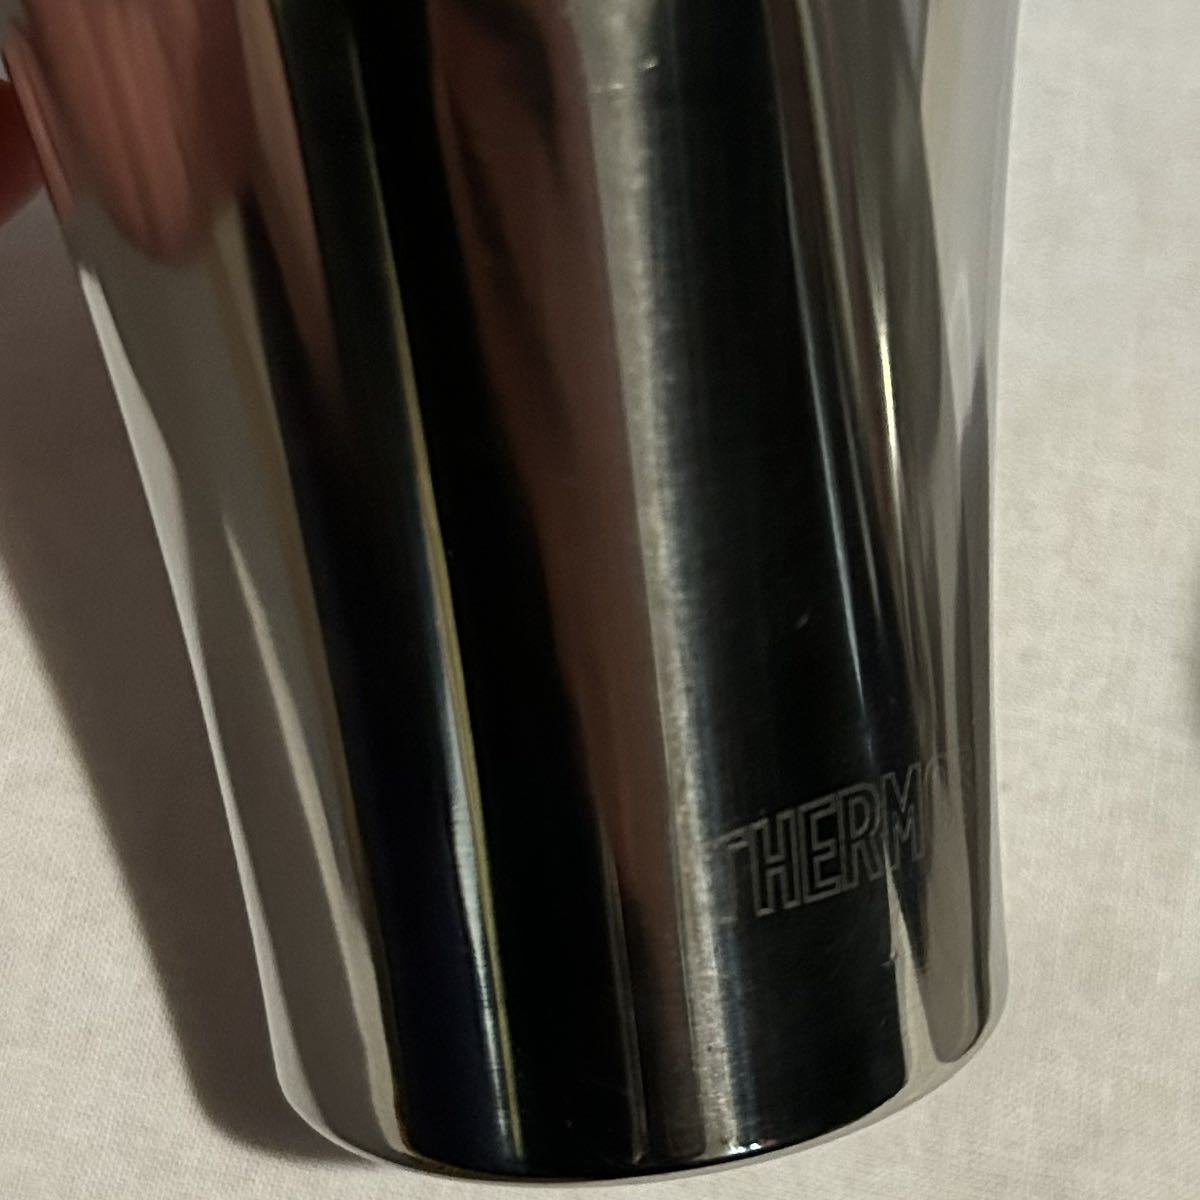 ★THERMOS★真空断熱タンブラー★JCY-400(SM) 052612CA★2個セット★STAINLESS STEEL MIRROR★アメトーーク！千原ジュニアさん紹介★400ml_正面下部の「THARMOS」ロゴ